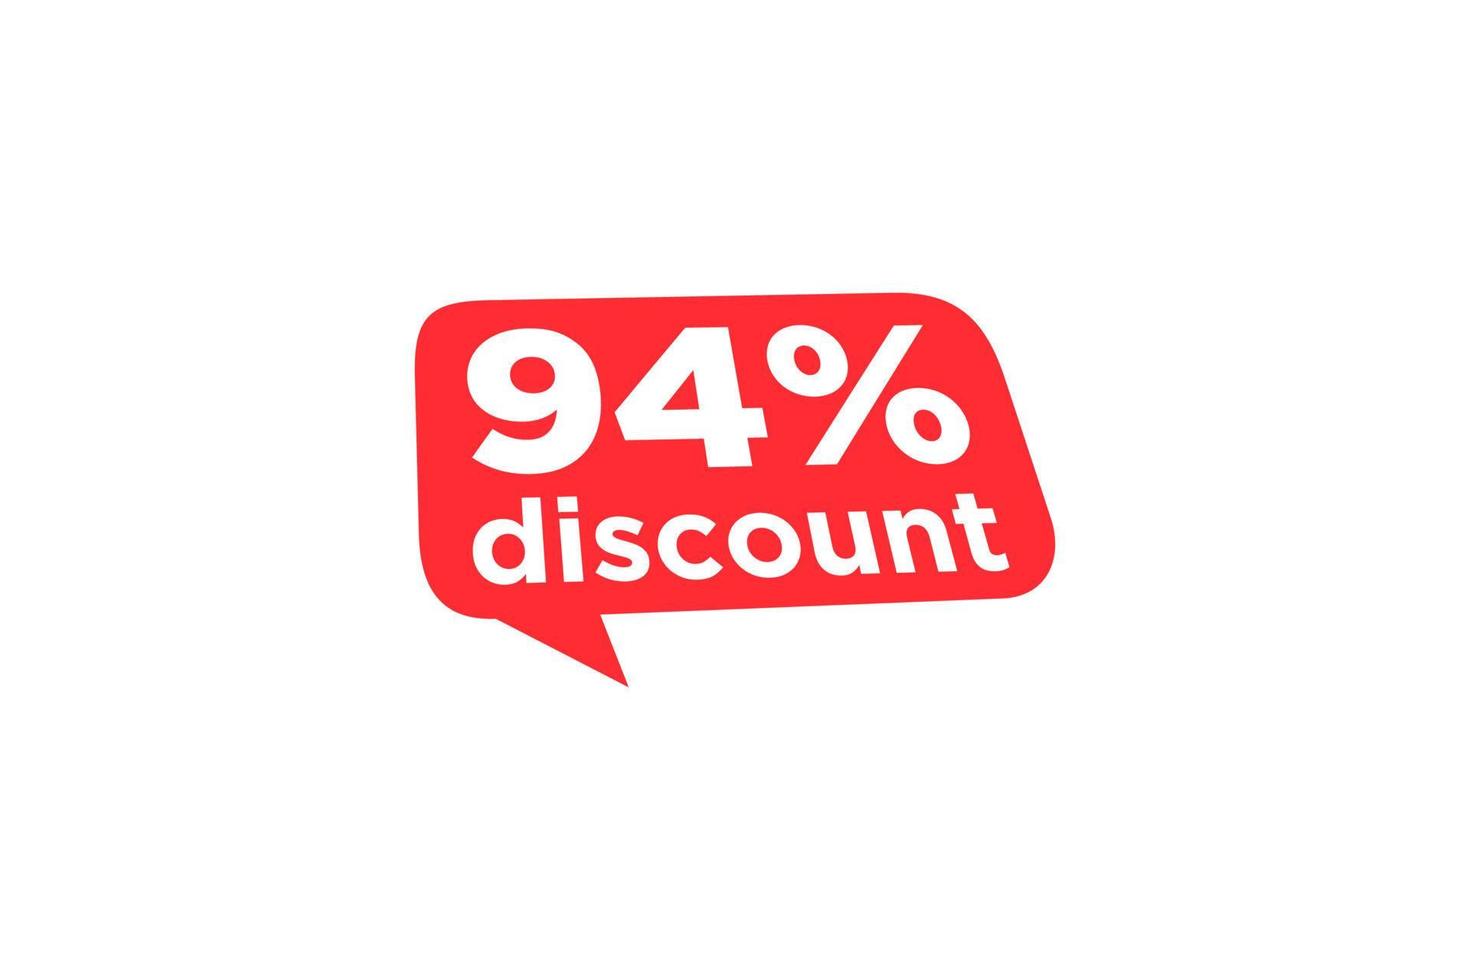 94 discount, Sales Vector badges for Labels, , Stickers, Banners, Tags, Web Stickers, New offer. Discount origami sign banner.